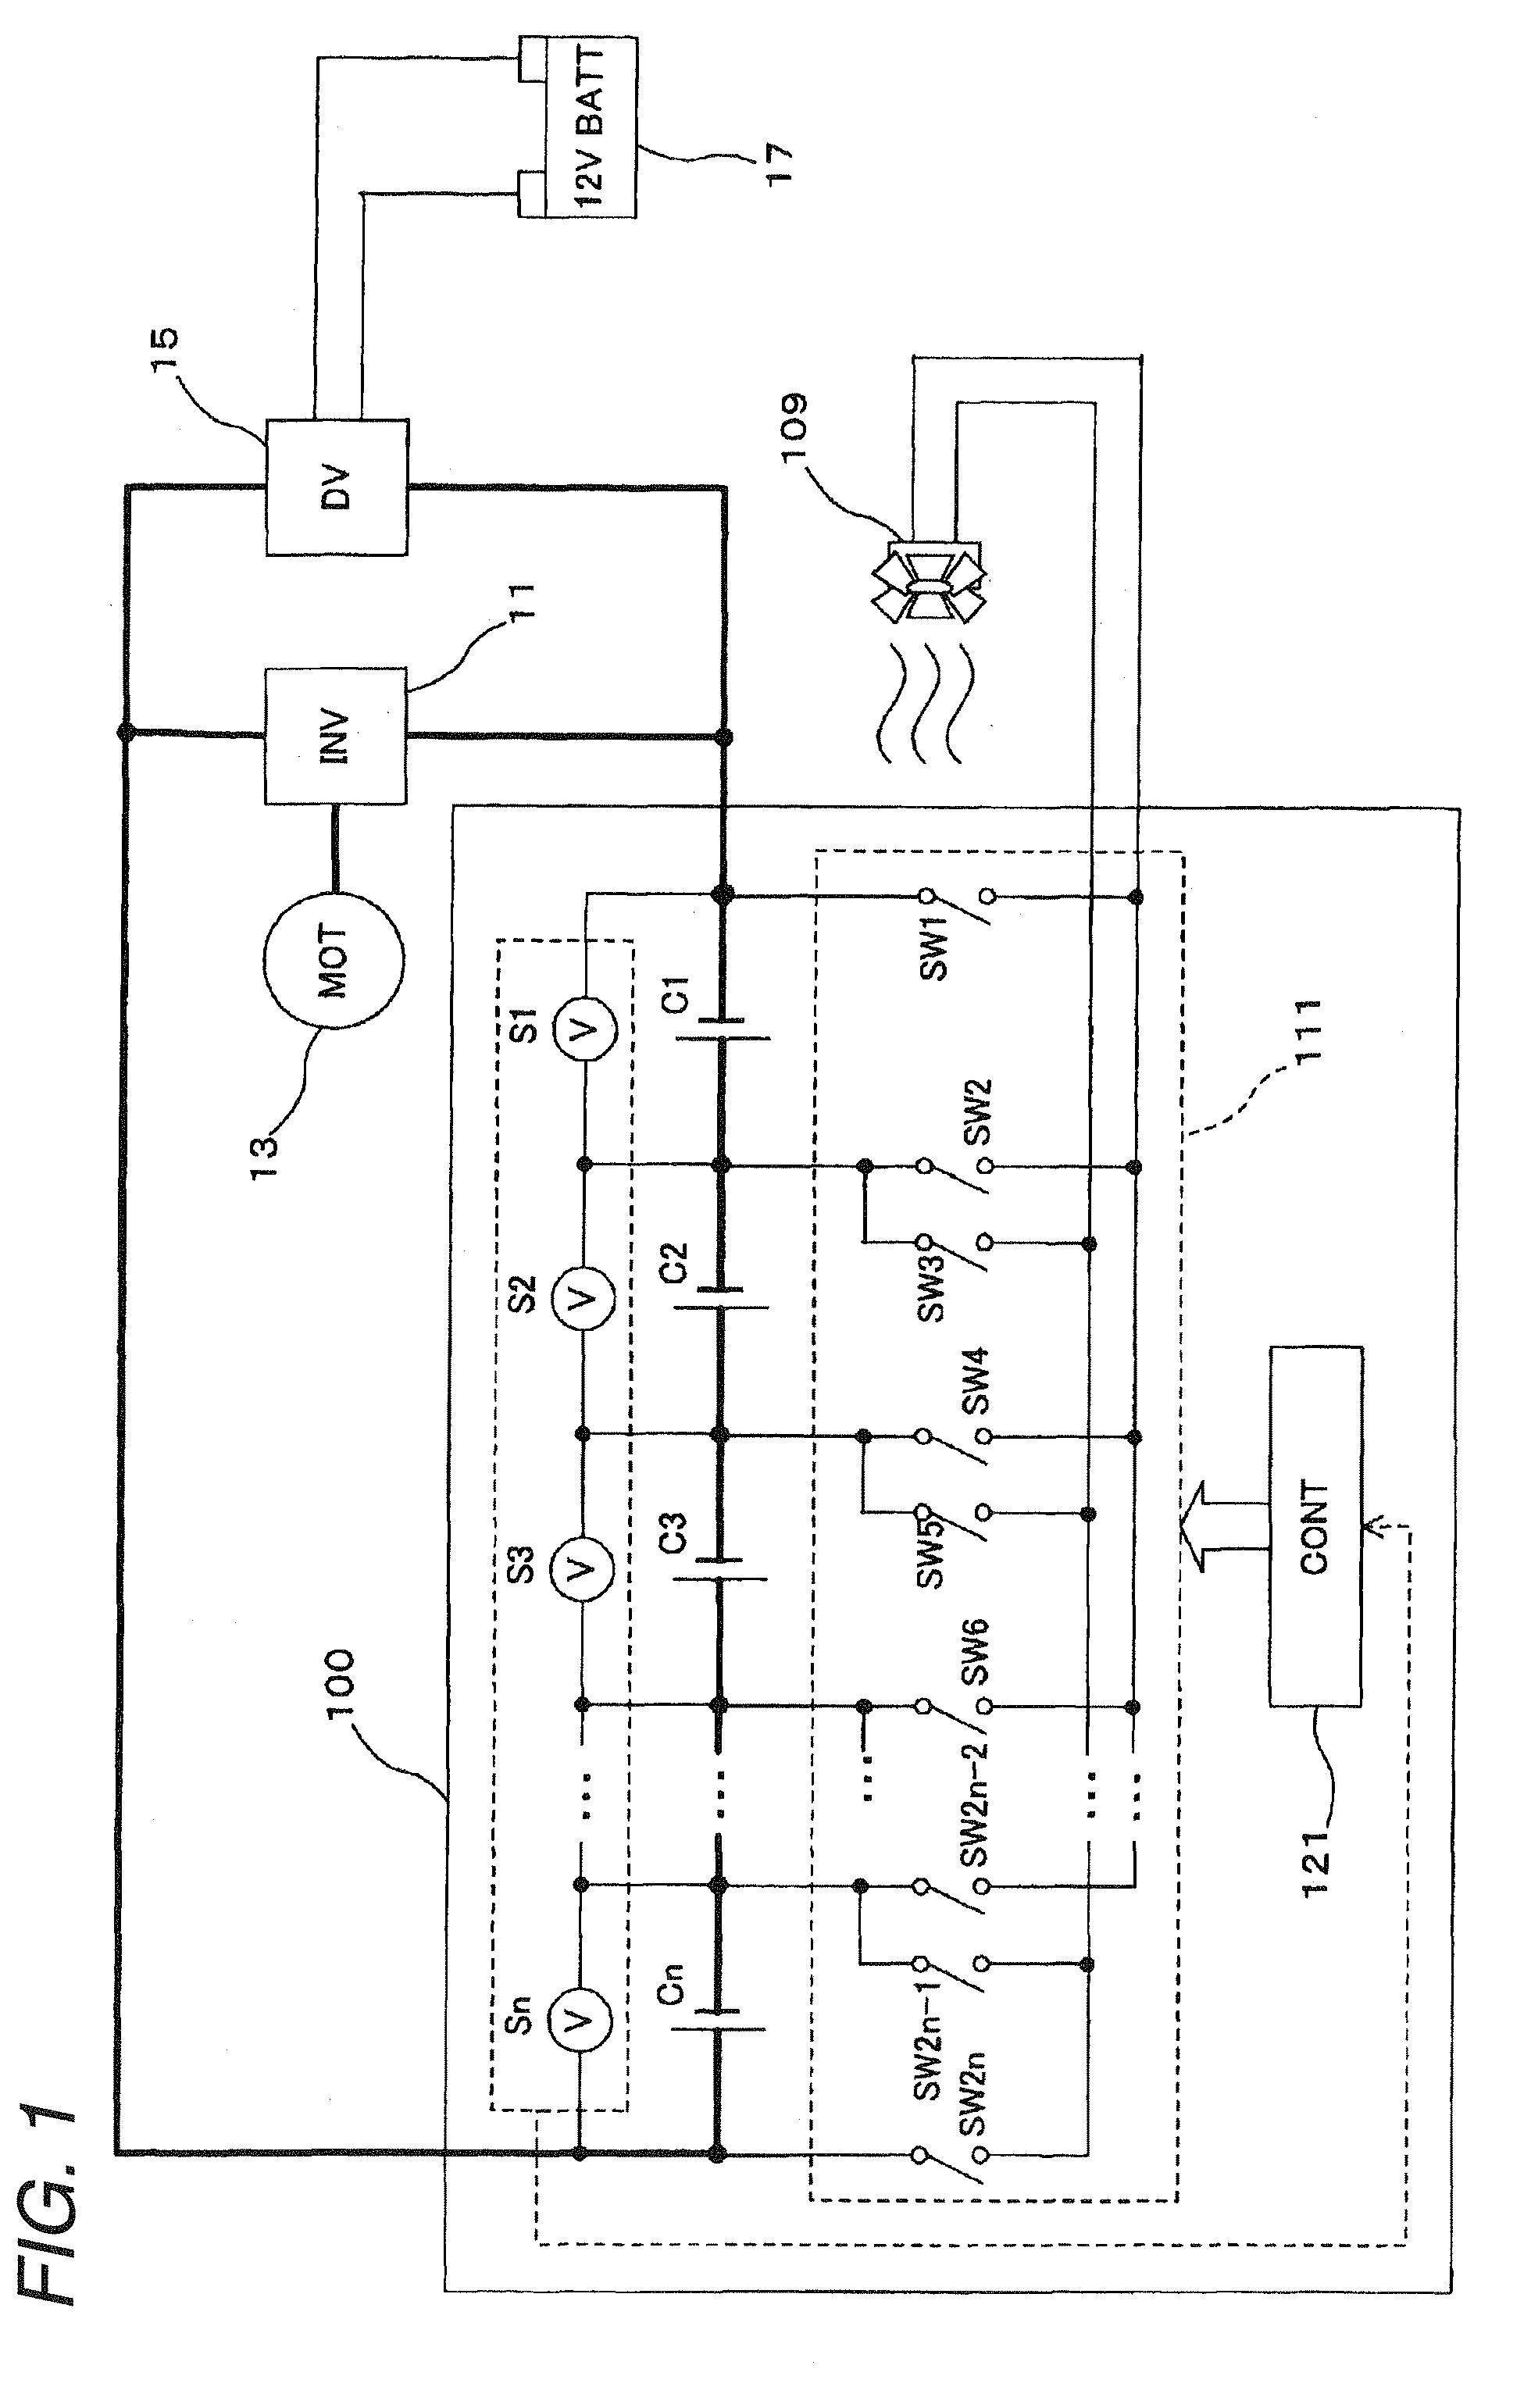 Discharge control system